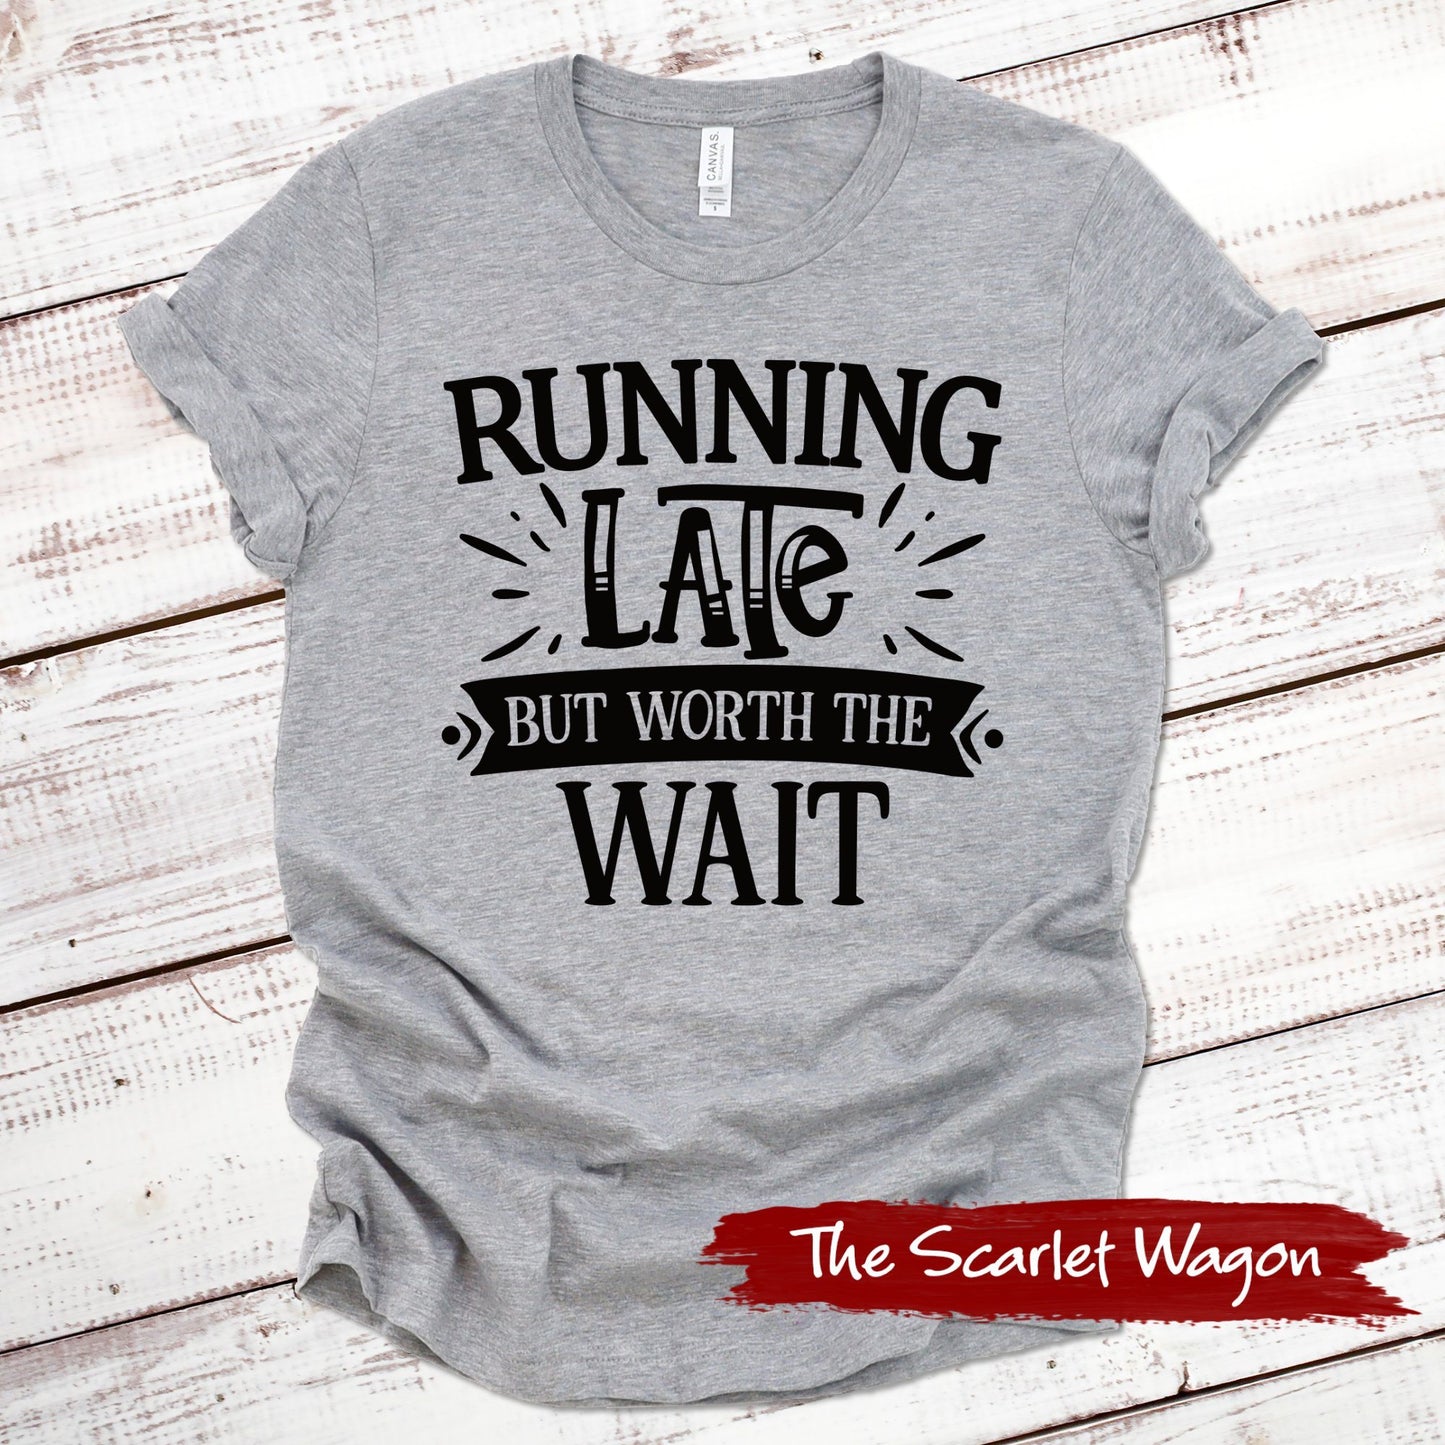 Running Late But Worth the Wait Funny Shirt Scarlet Wagon Athletic Heather XS 